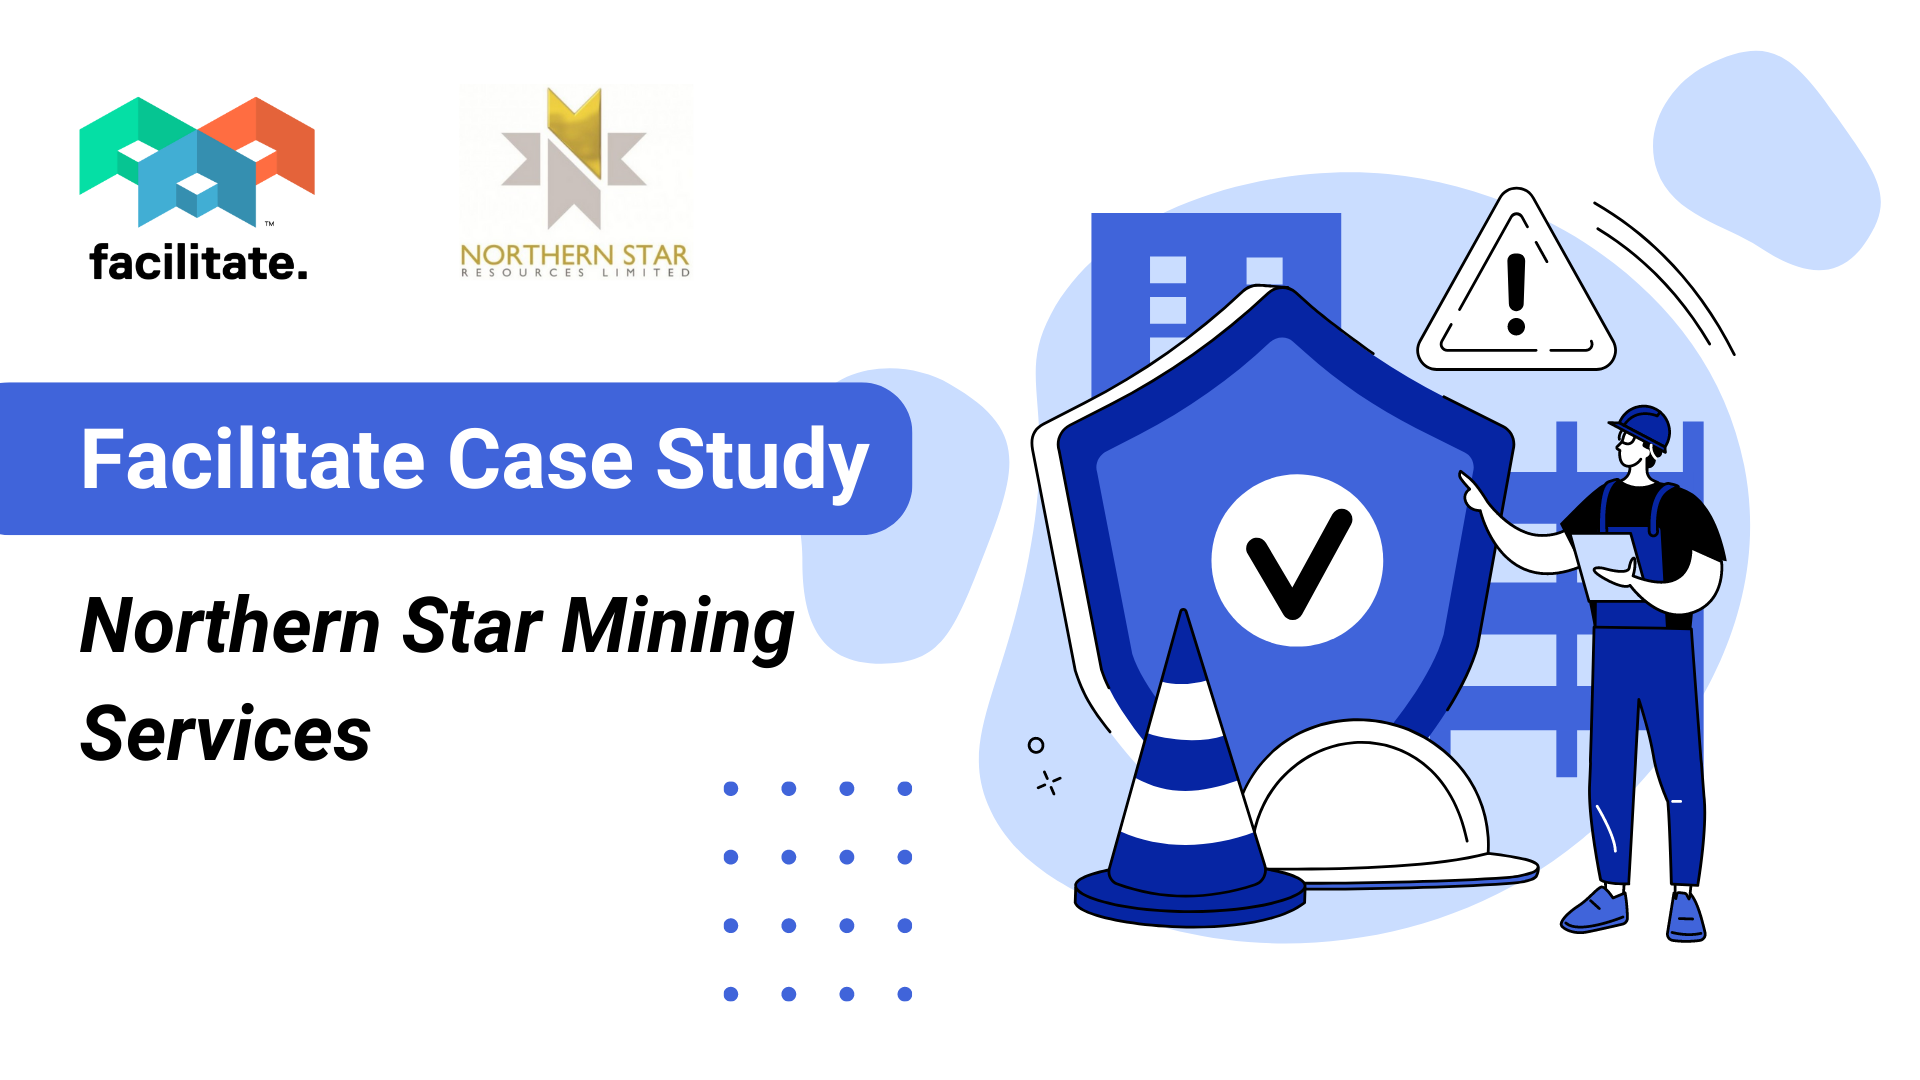 Facilitate mining use case with Northern Star Mining Services